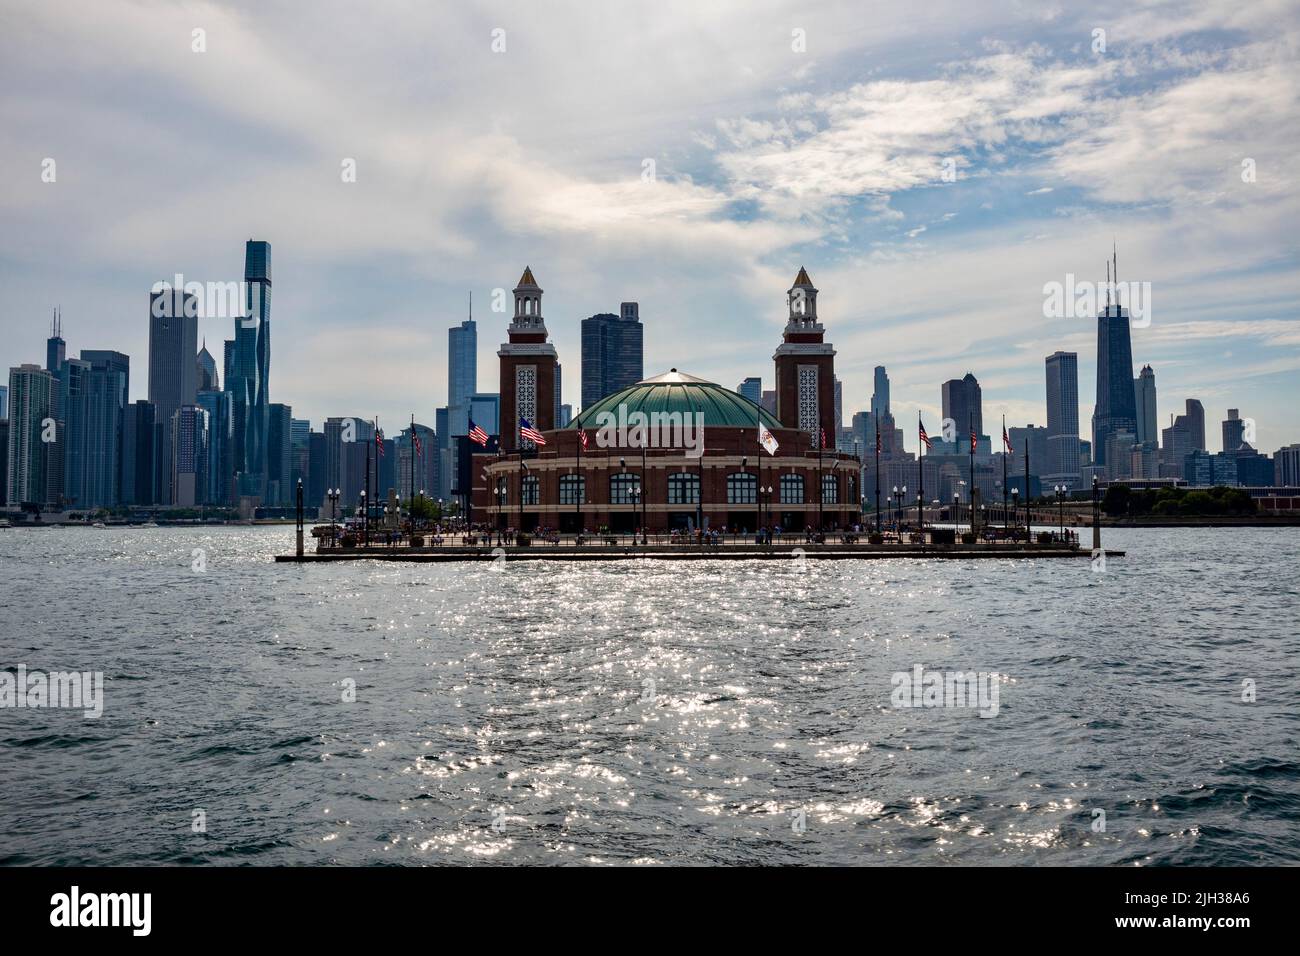 Chicago Skyline and Navy Pier on Lake Michigan in Chicago Illinois, USA Stock Photo